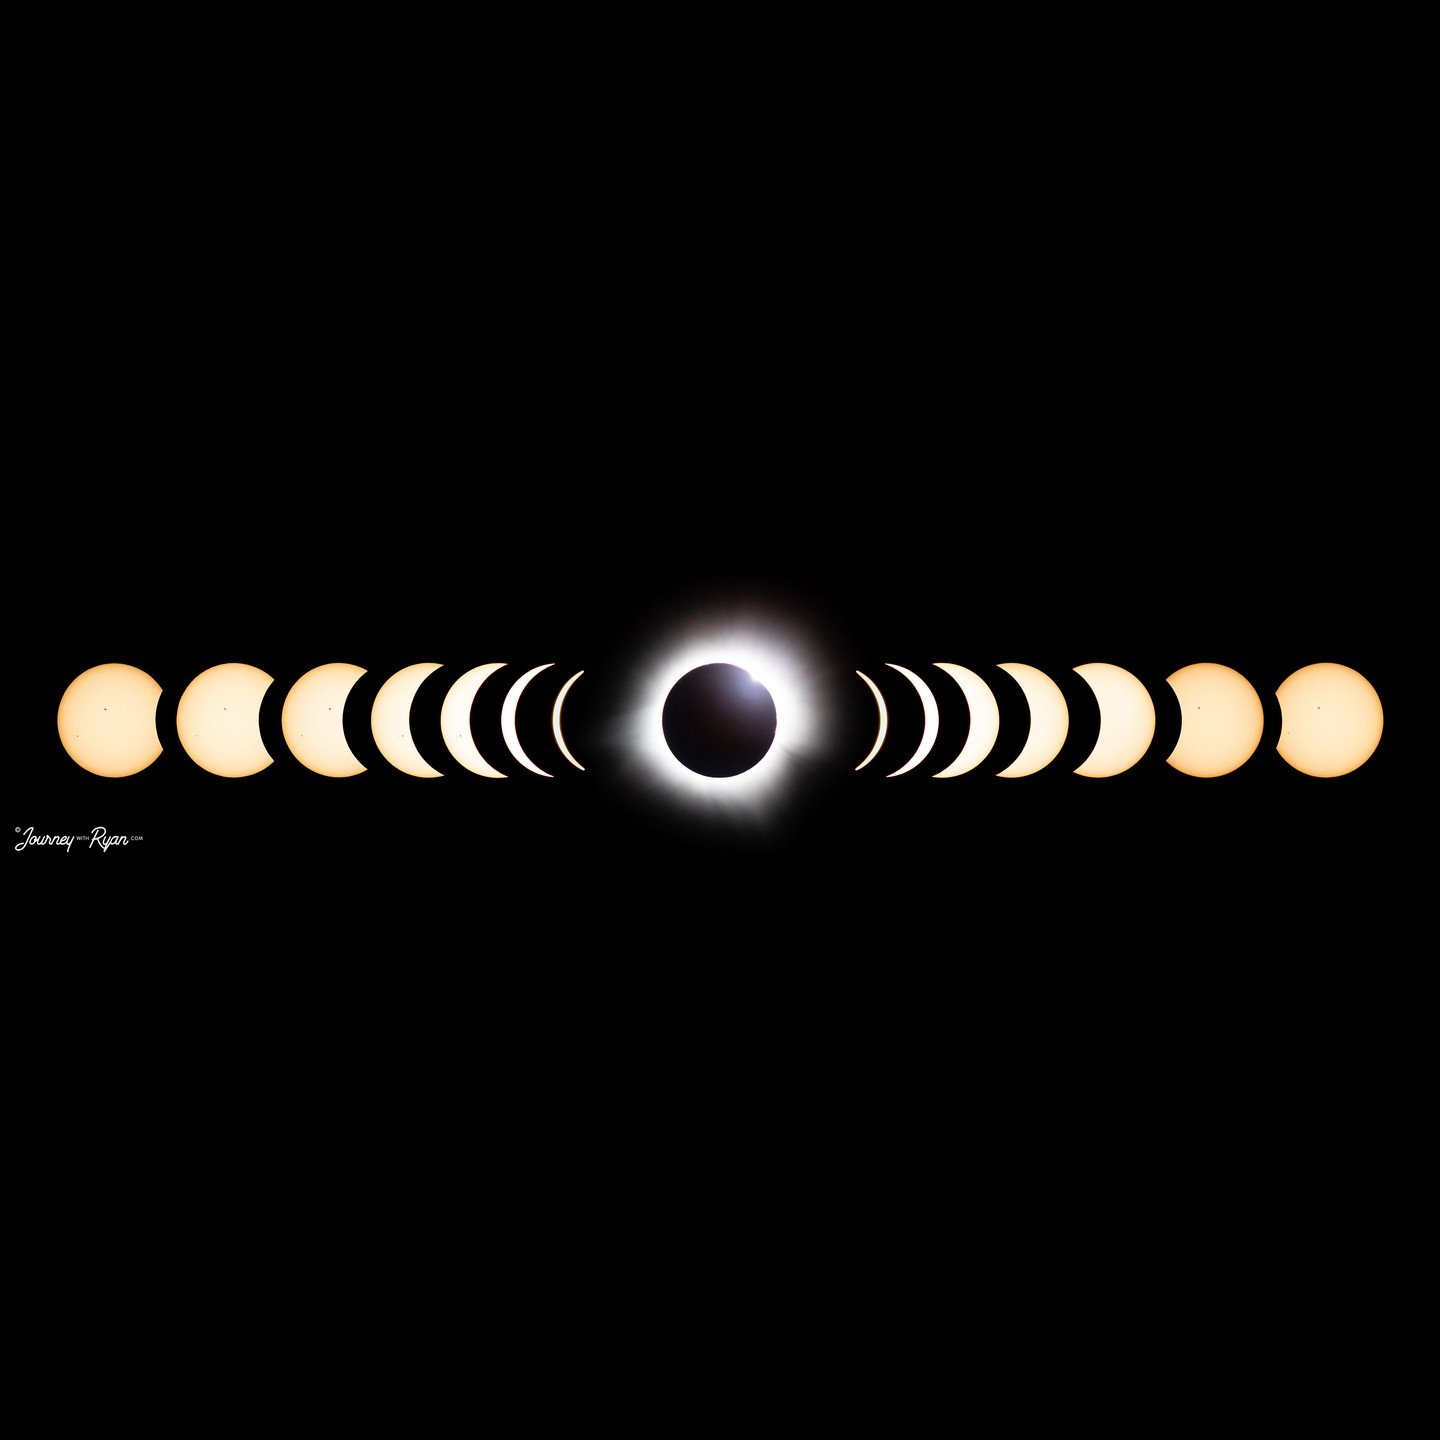 Total Eclipse
.
As many experienced (or re-experienced) this past Monday, eclipses take on many forms throughout their process. I rarely feel like a shot of totality by itself, alone in the sky, really does it justice. It's a transitional experience 